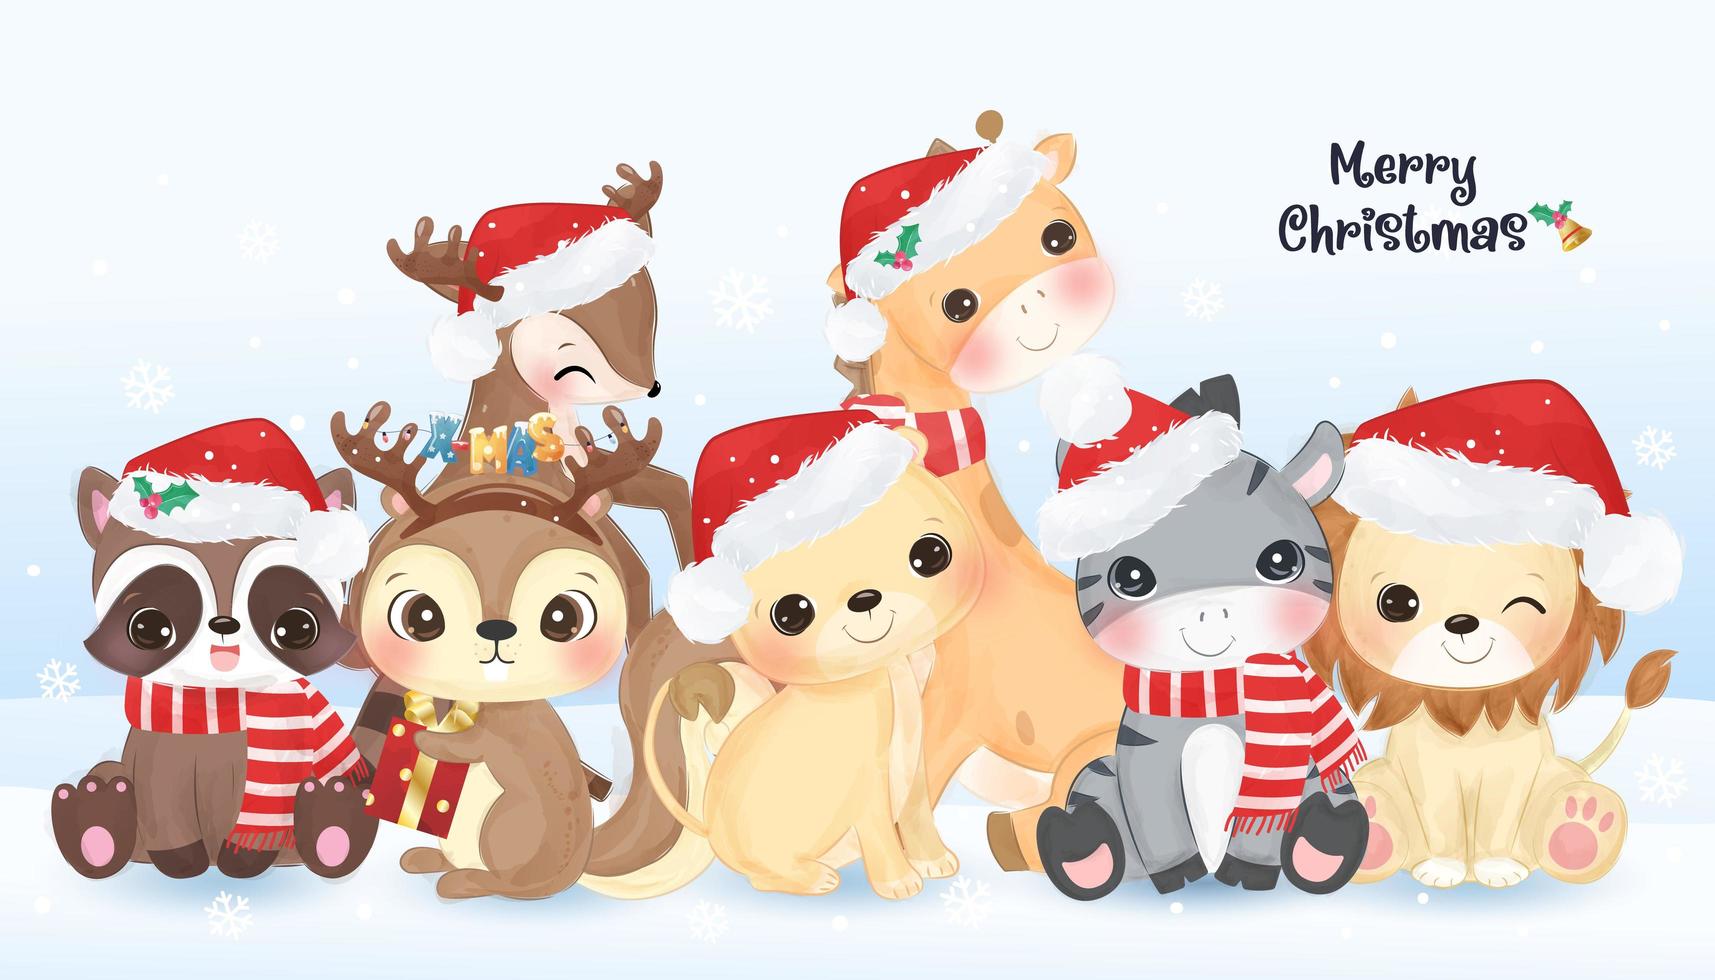 Christmas greeting card with cute animals vector